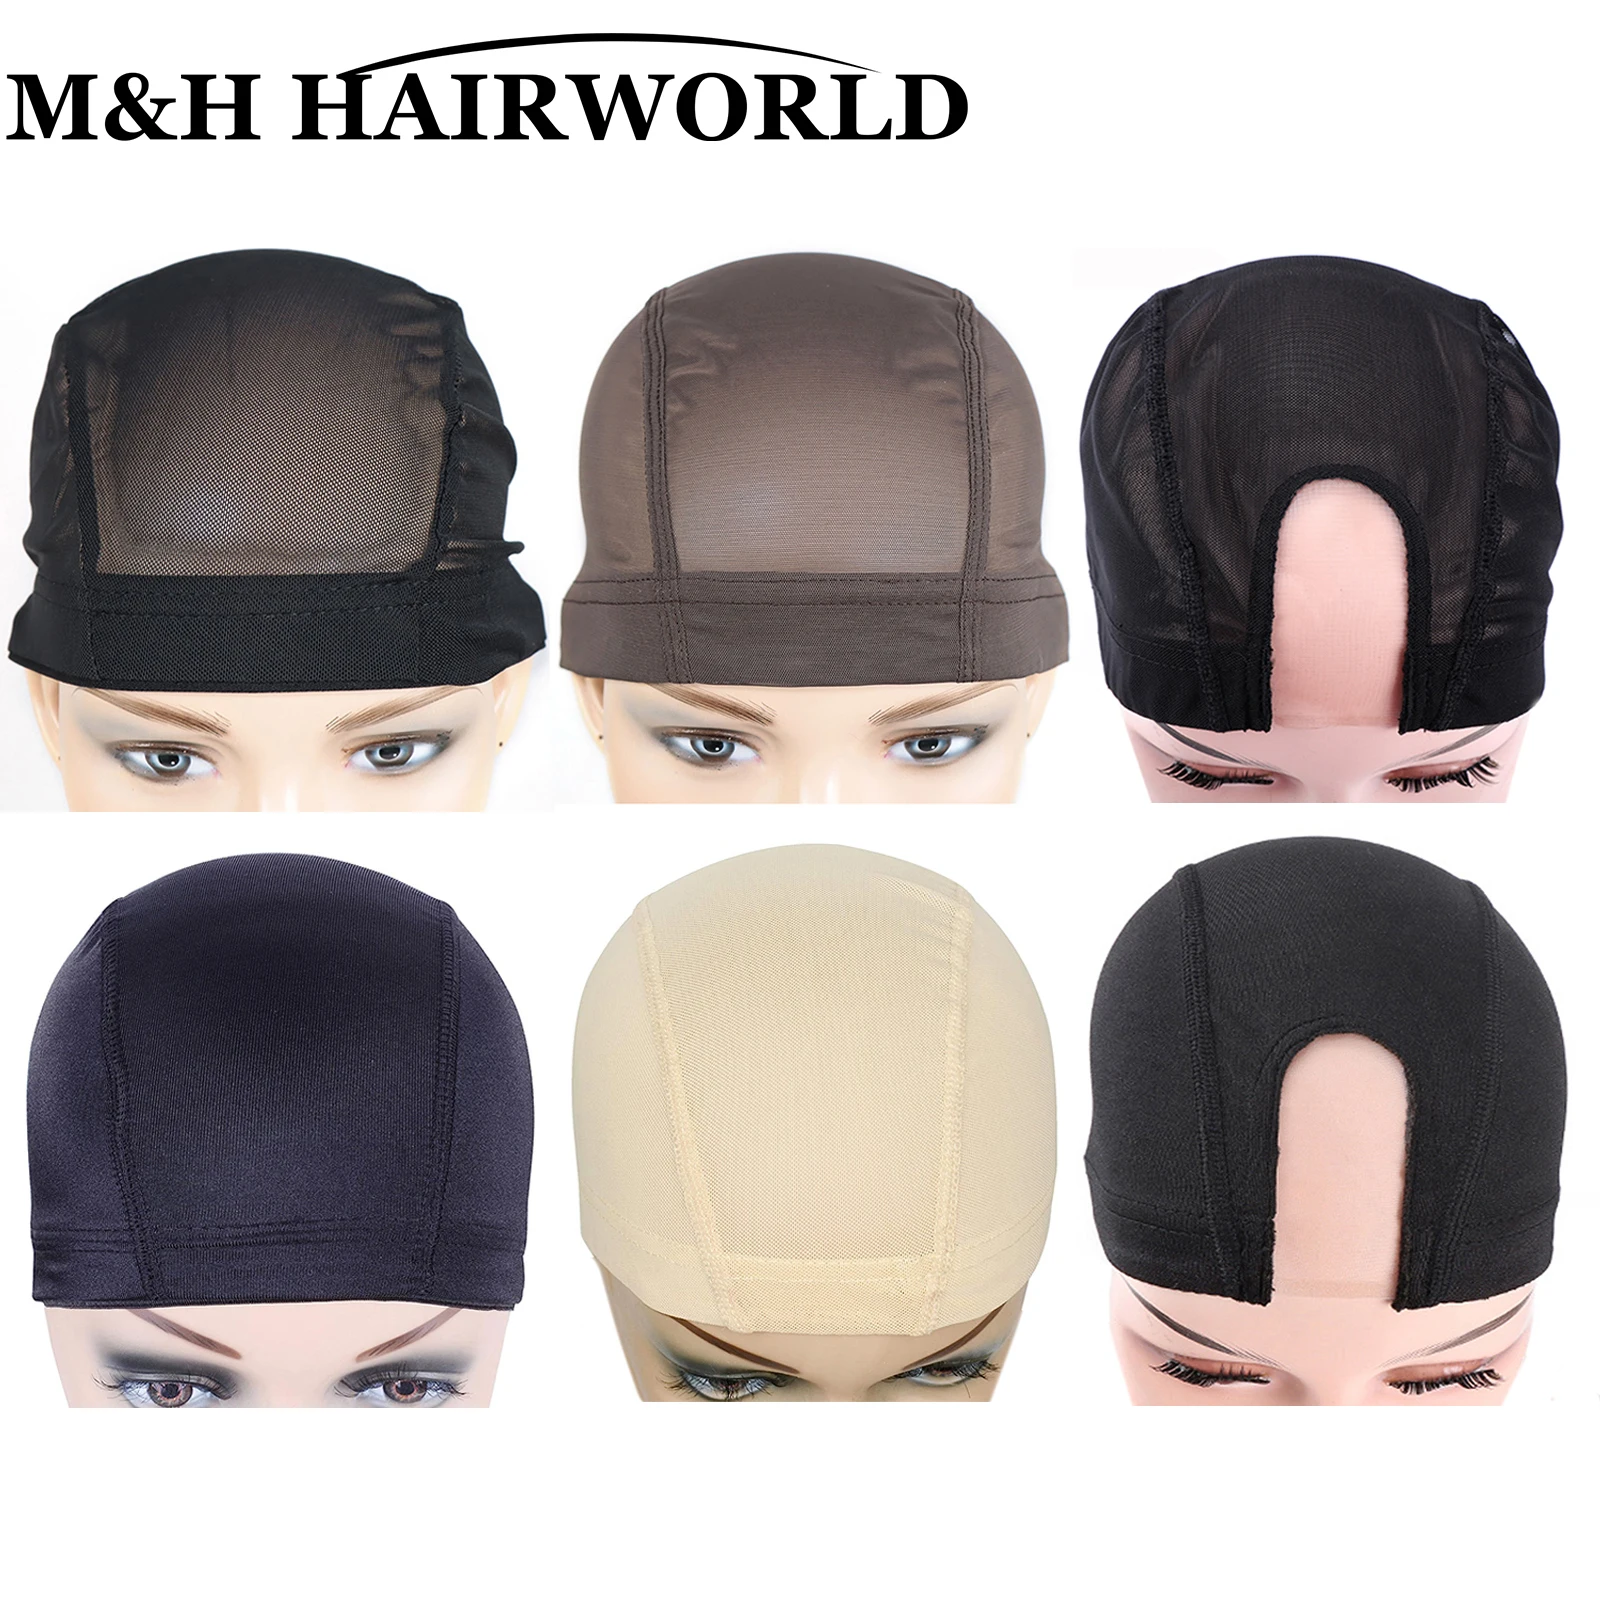 

5PCS Mesh Dome Wig Caps for Making Wig U Part Mono Dome Wig Cap With Elastic Band Stretch Breathable Spandex Black Weaving Cap